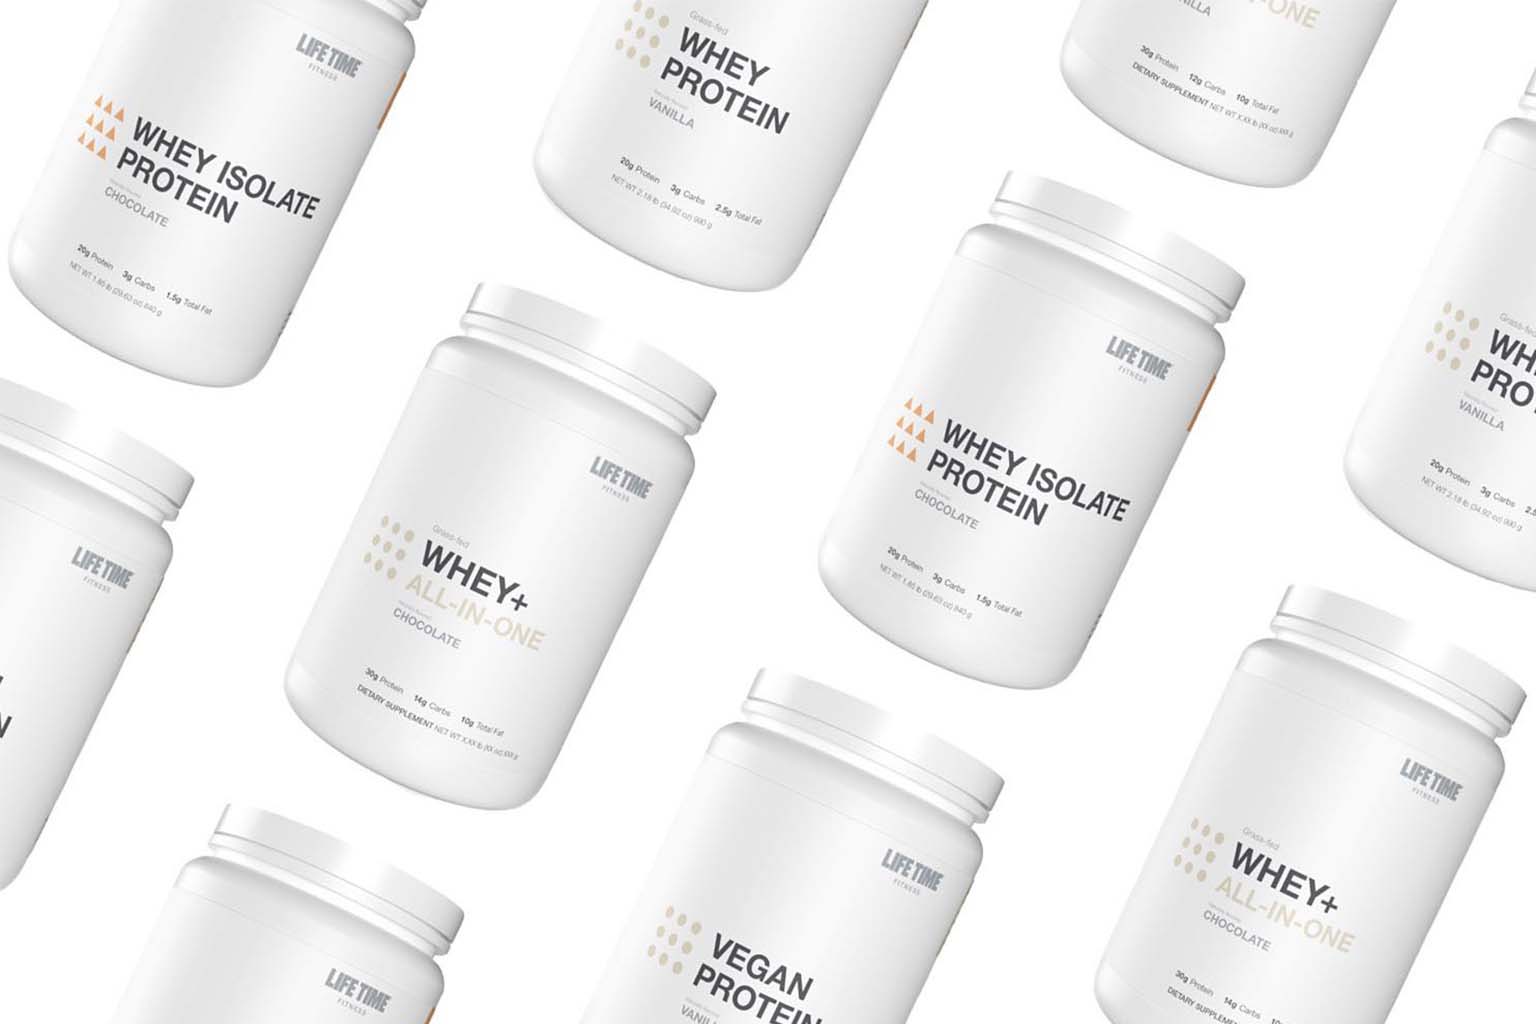 Protein powder containers from the Life Time health store